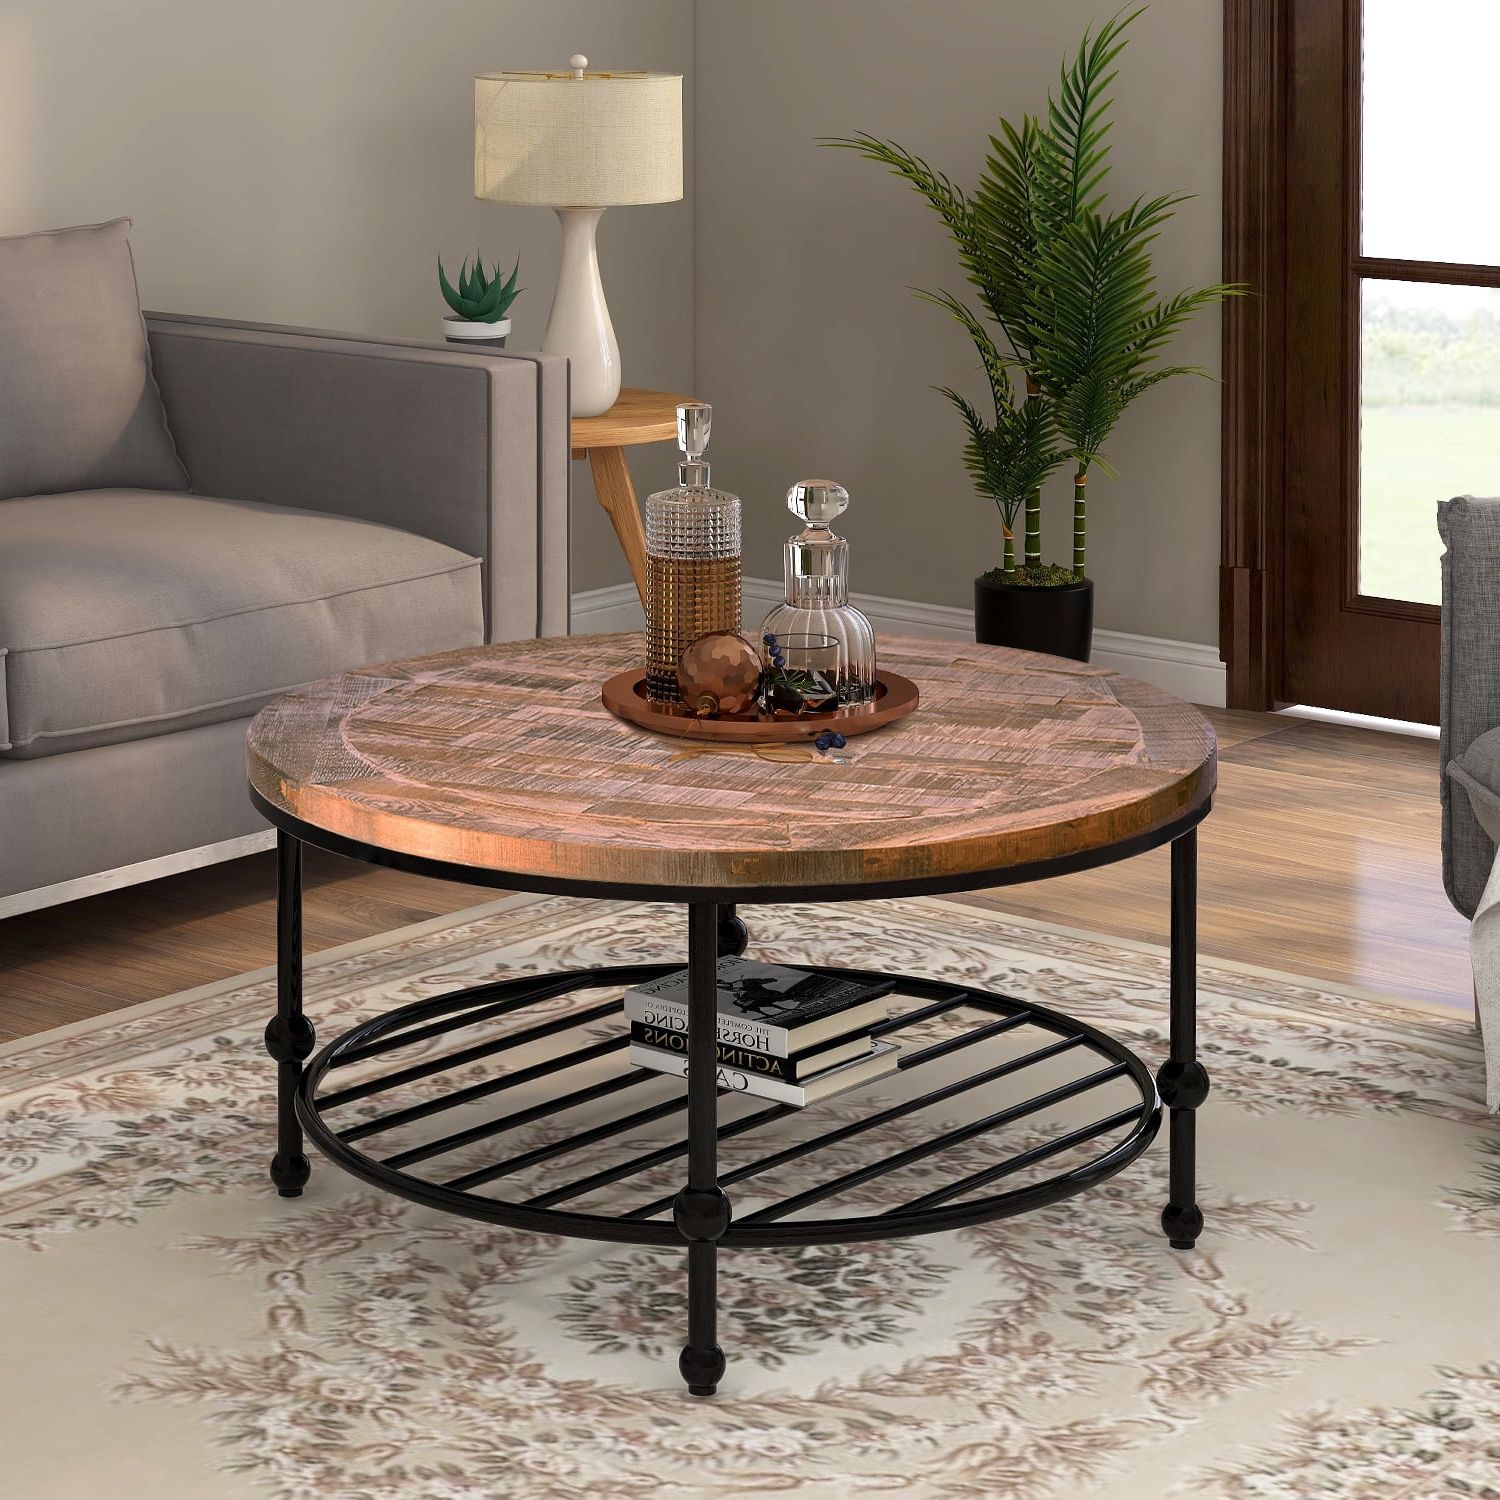 Latest Rustic Natural Round Coffee Table With Storage Shelf For Living Room Intended For Round Coffee Tables With Storage (View 4 of 15)